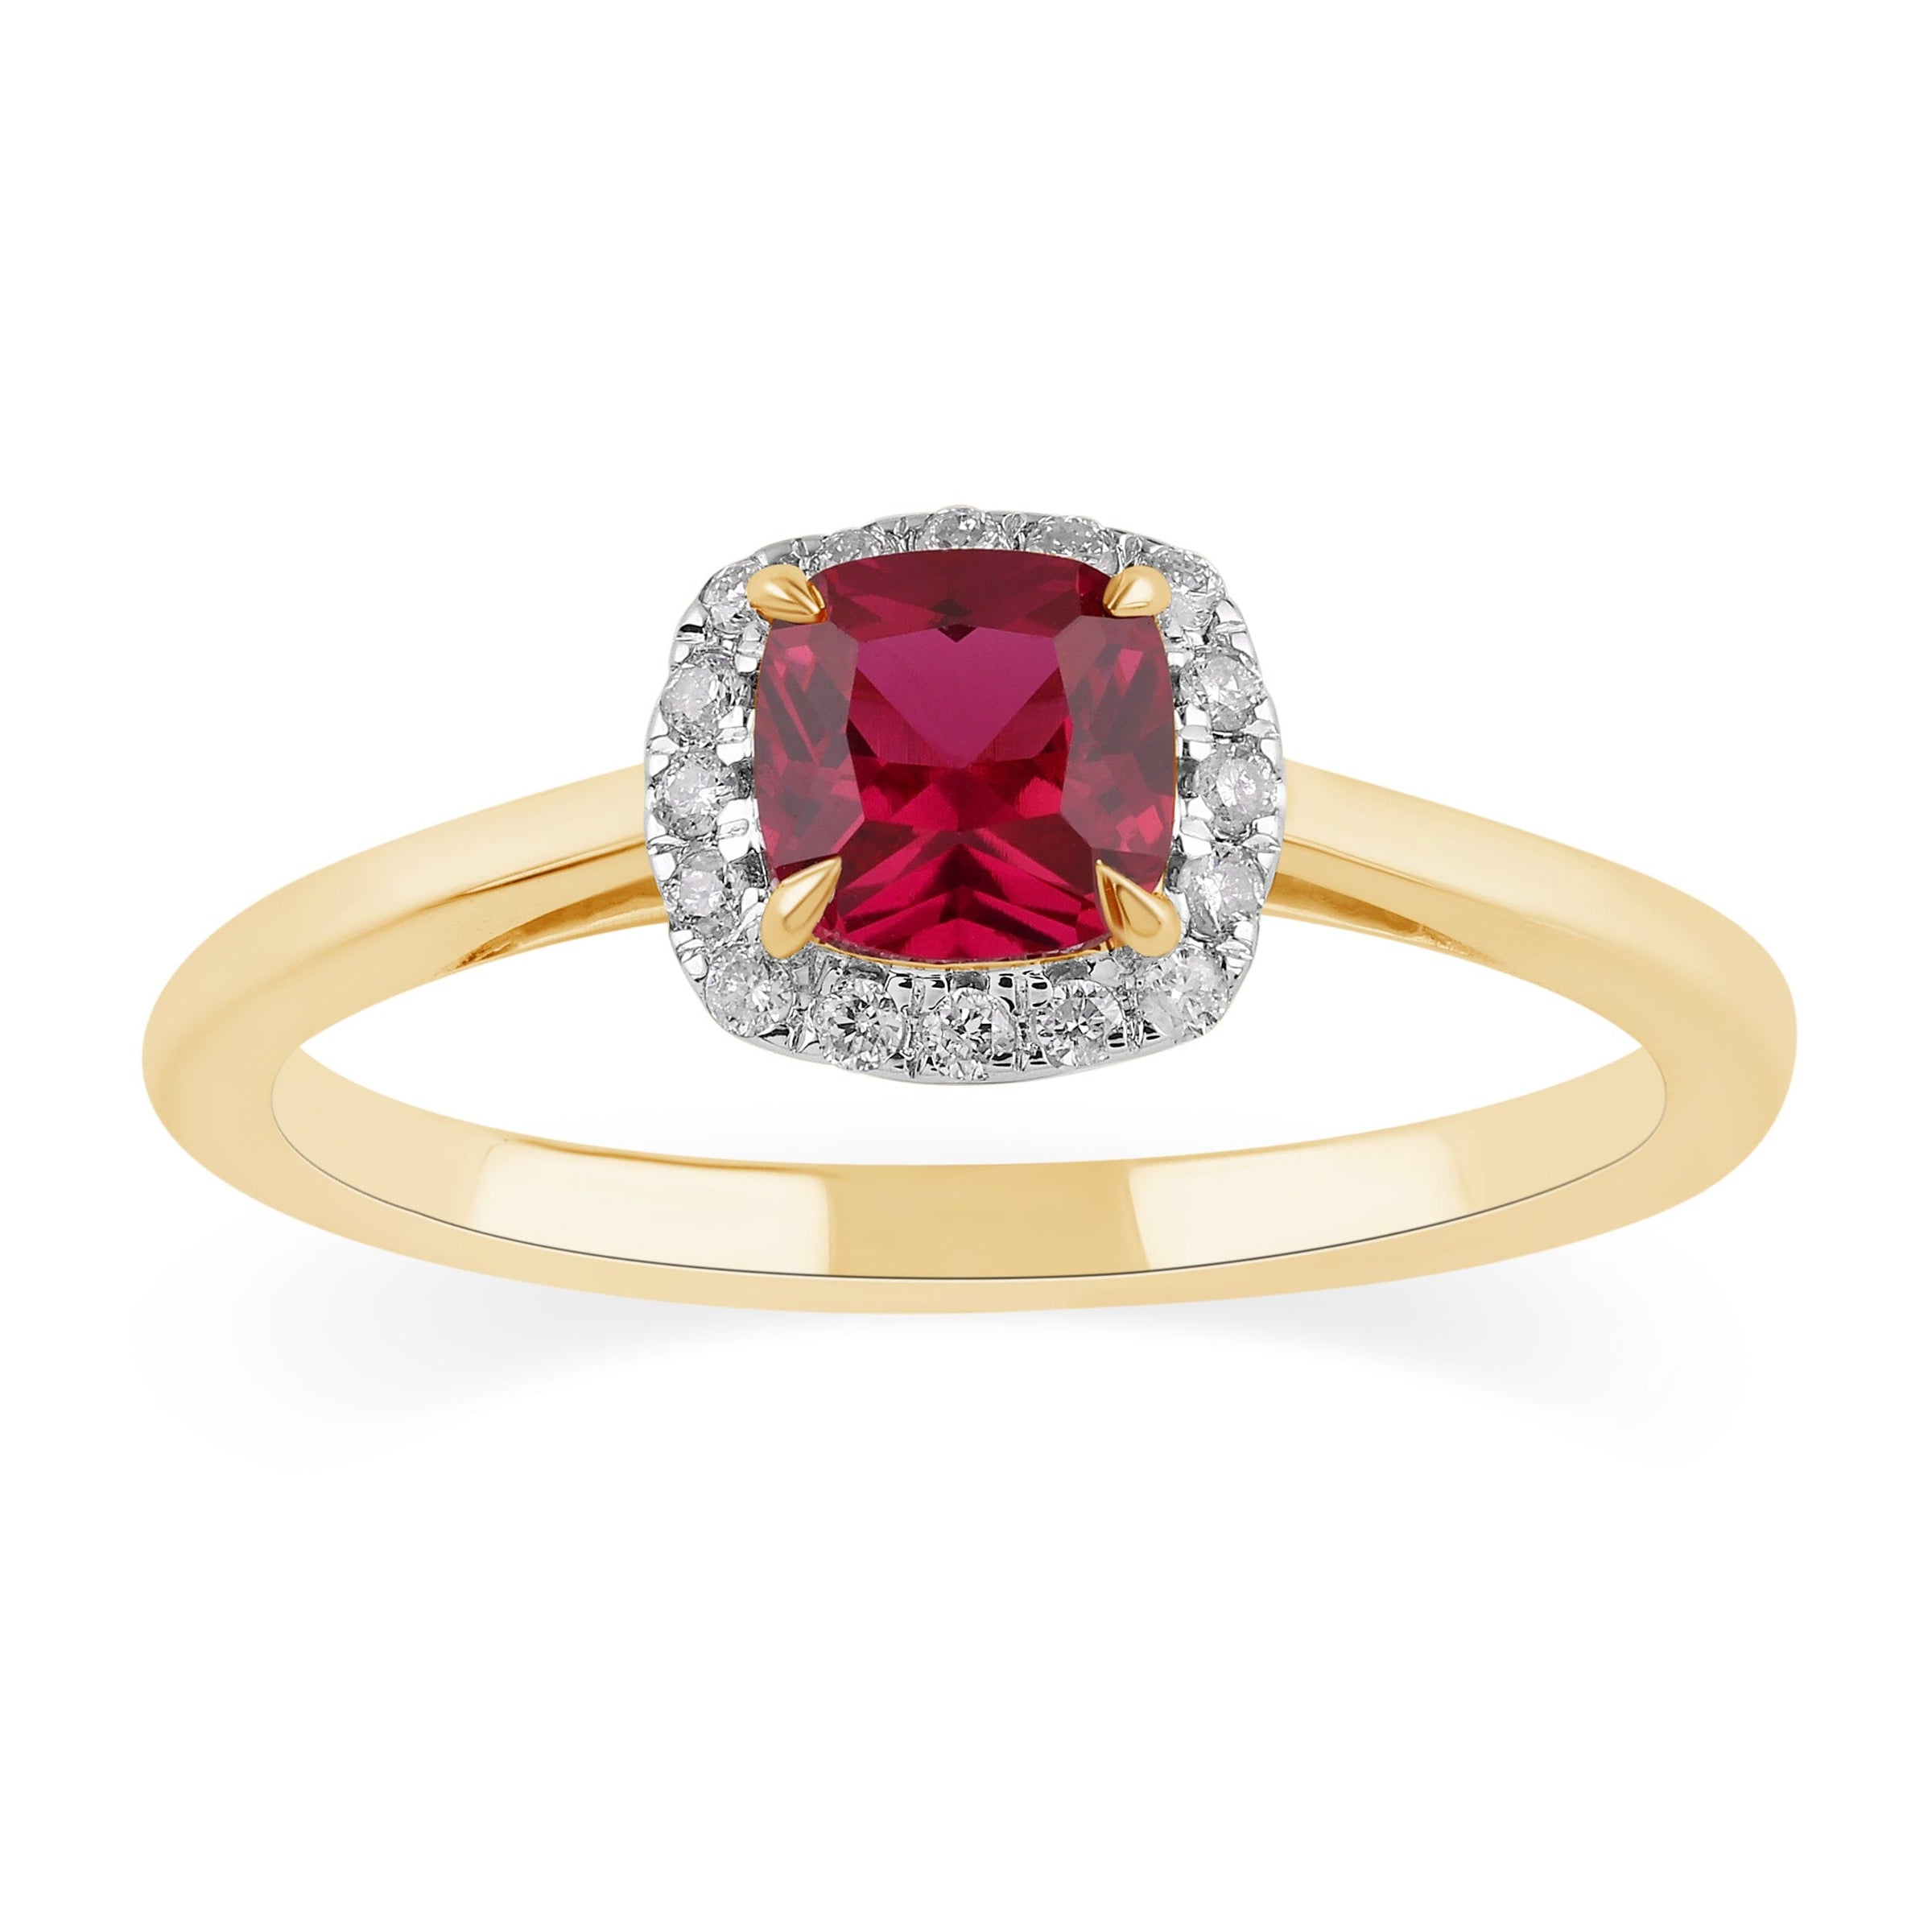 Halo Dress Ring with Created Ruby and 0.05ct of Diamonds in 9ct Yellow Gold Rings Bevilles 